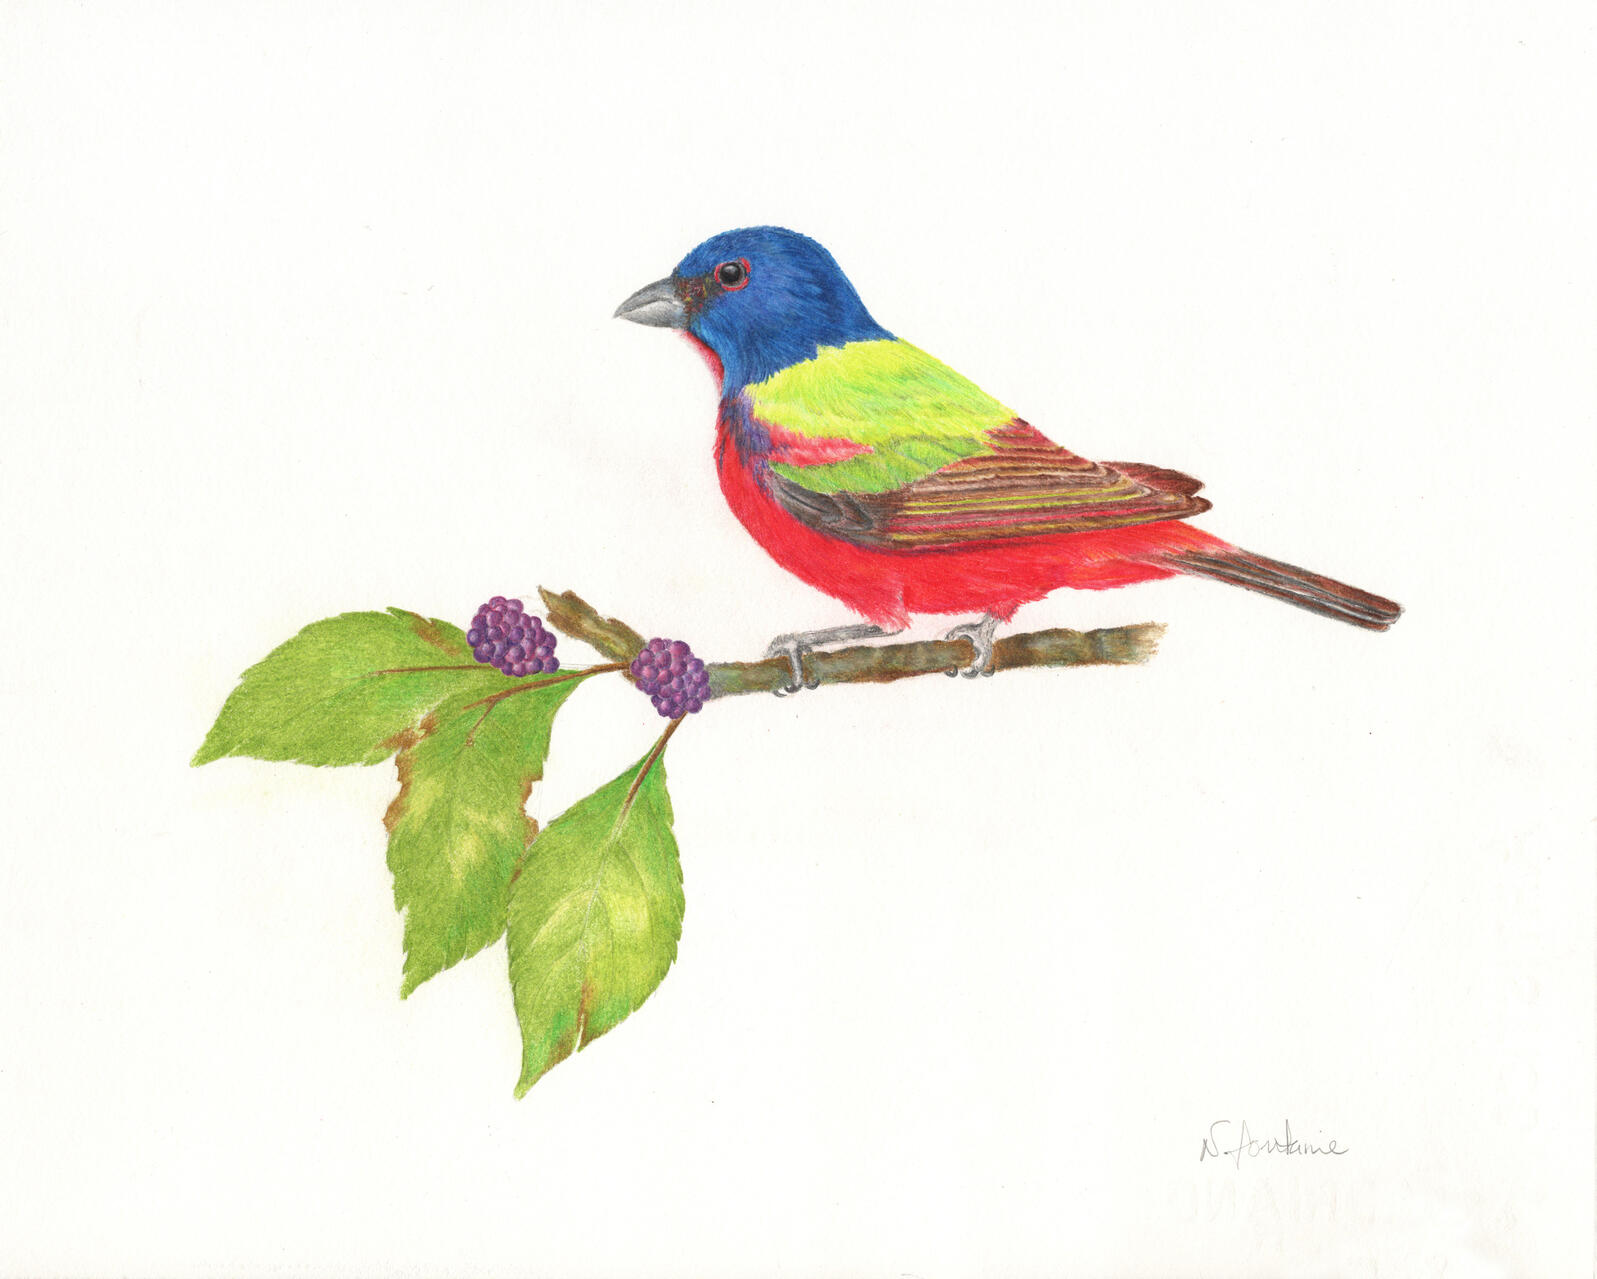 An illustration of a male Painted Bunting on a branch.